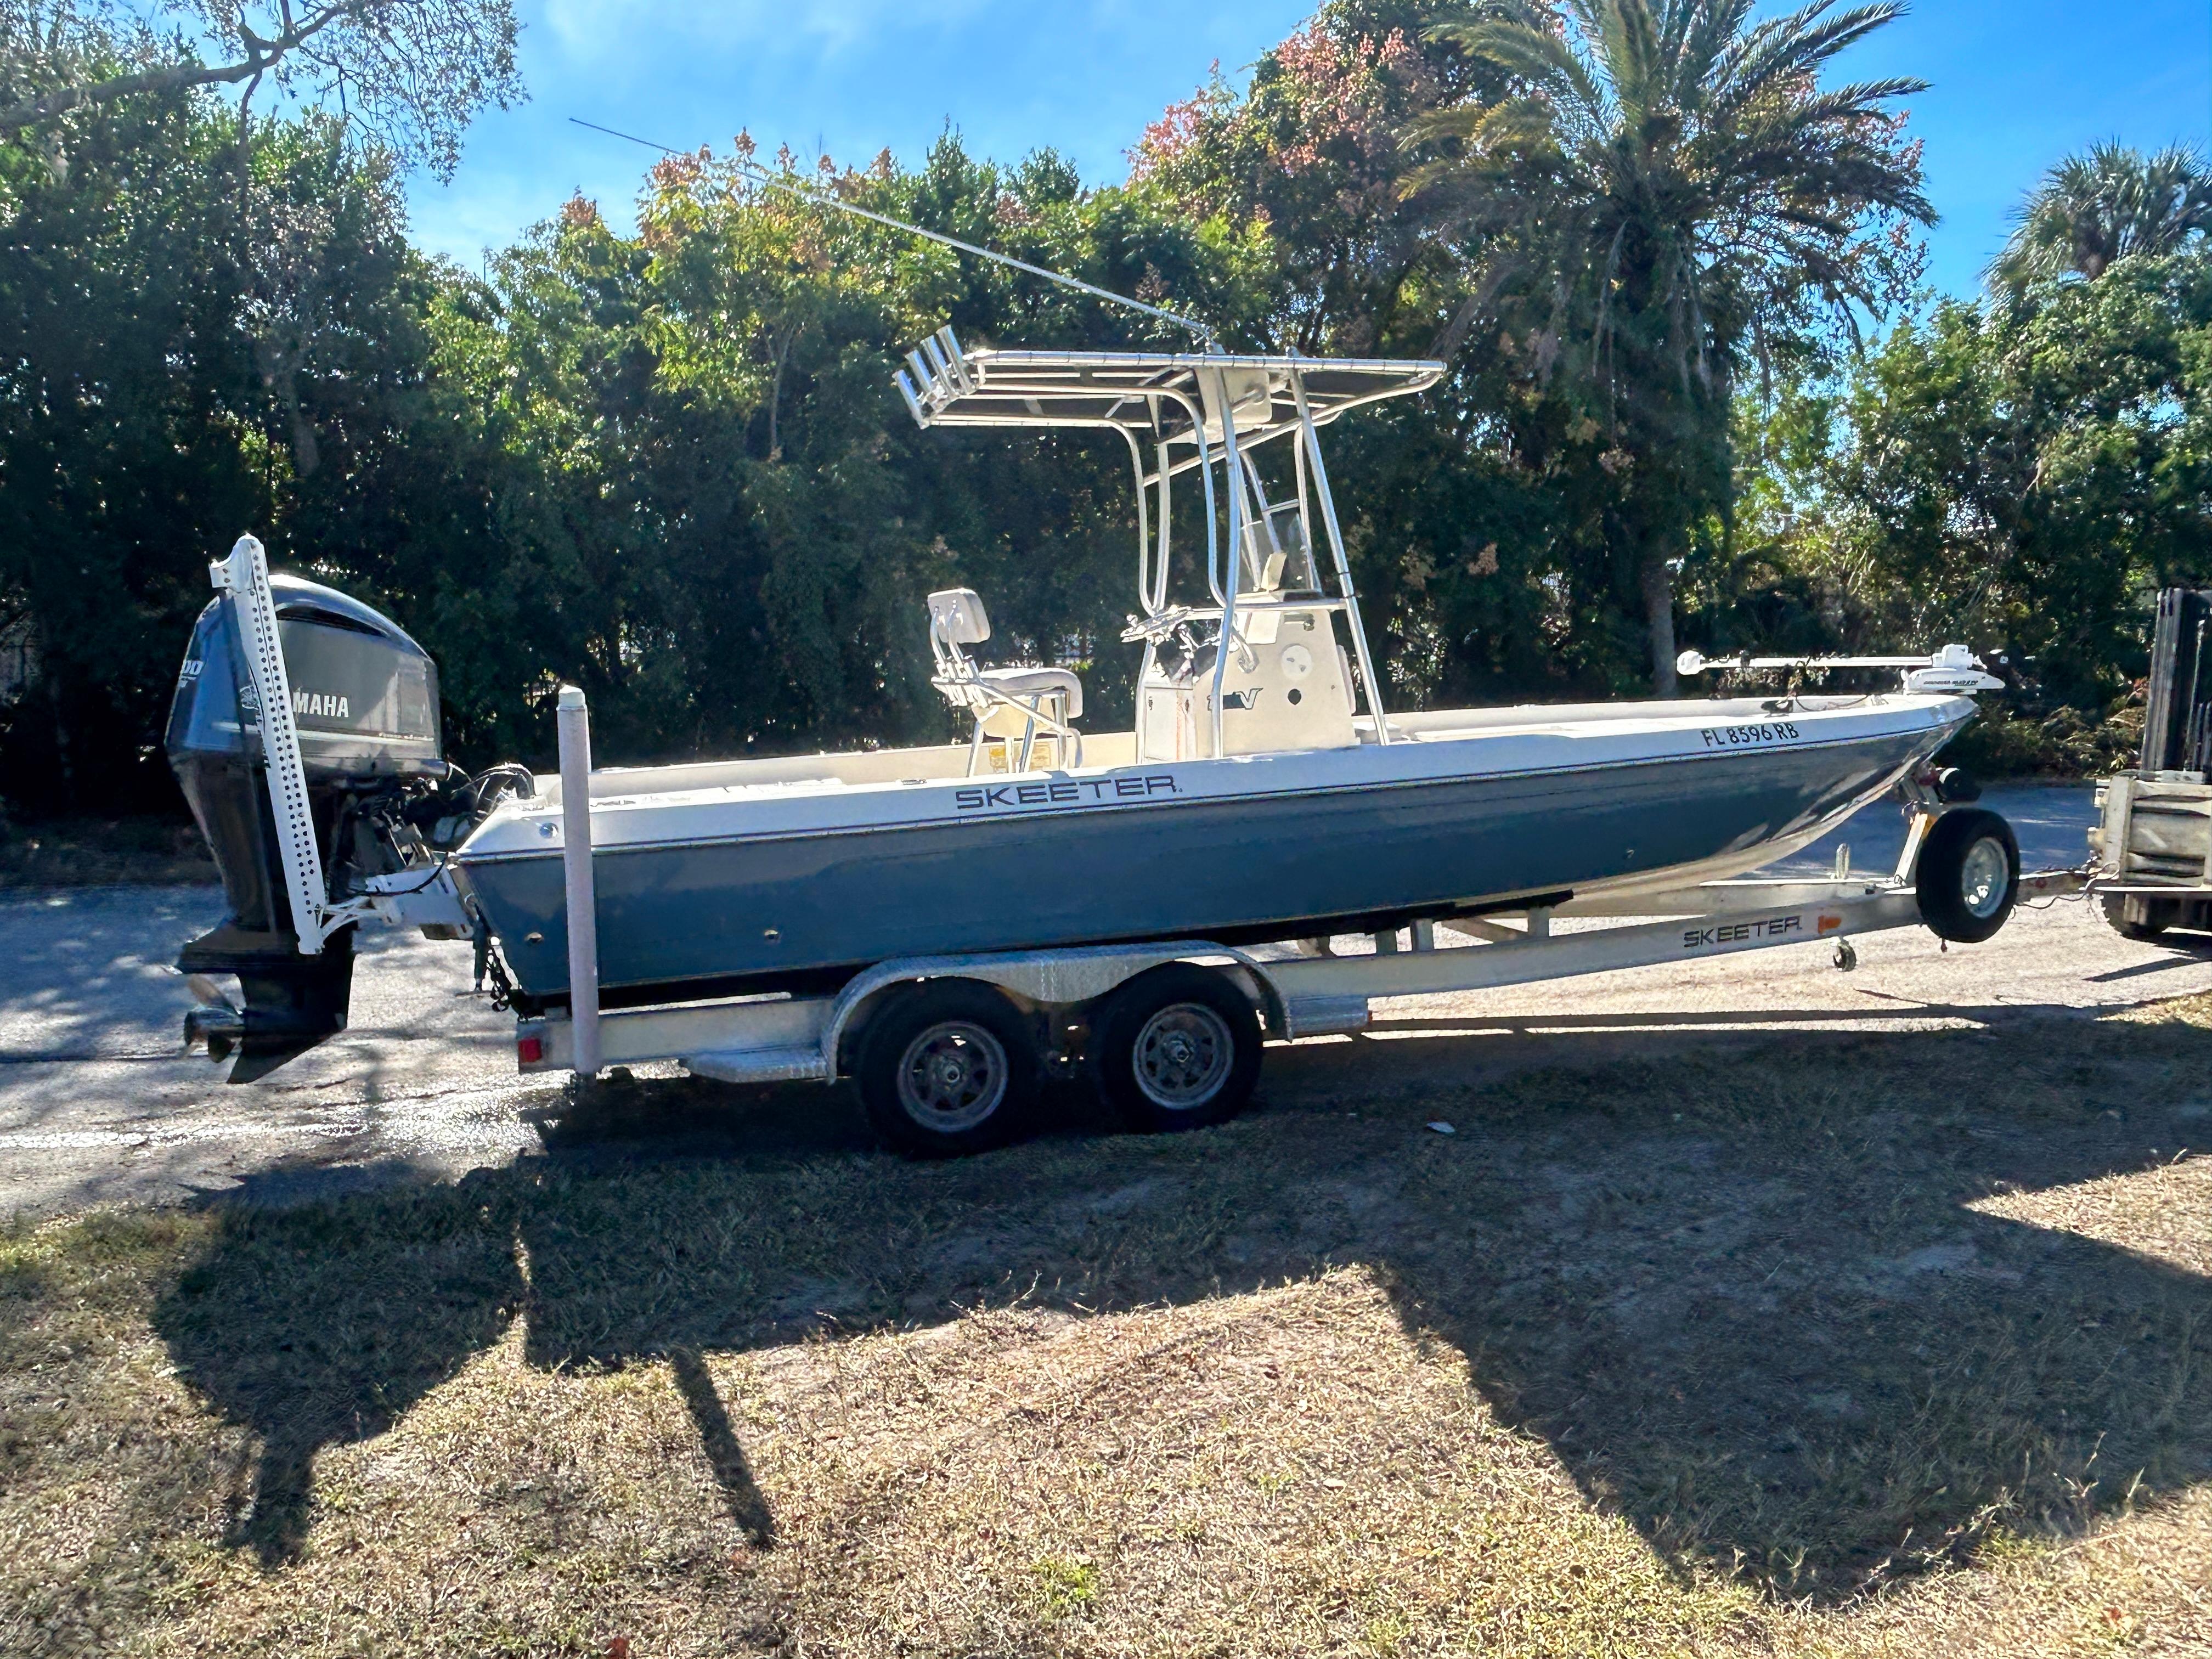 Explore Skeeter Zx 24 Boats For Sale - Boat Trader